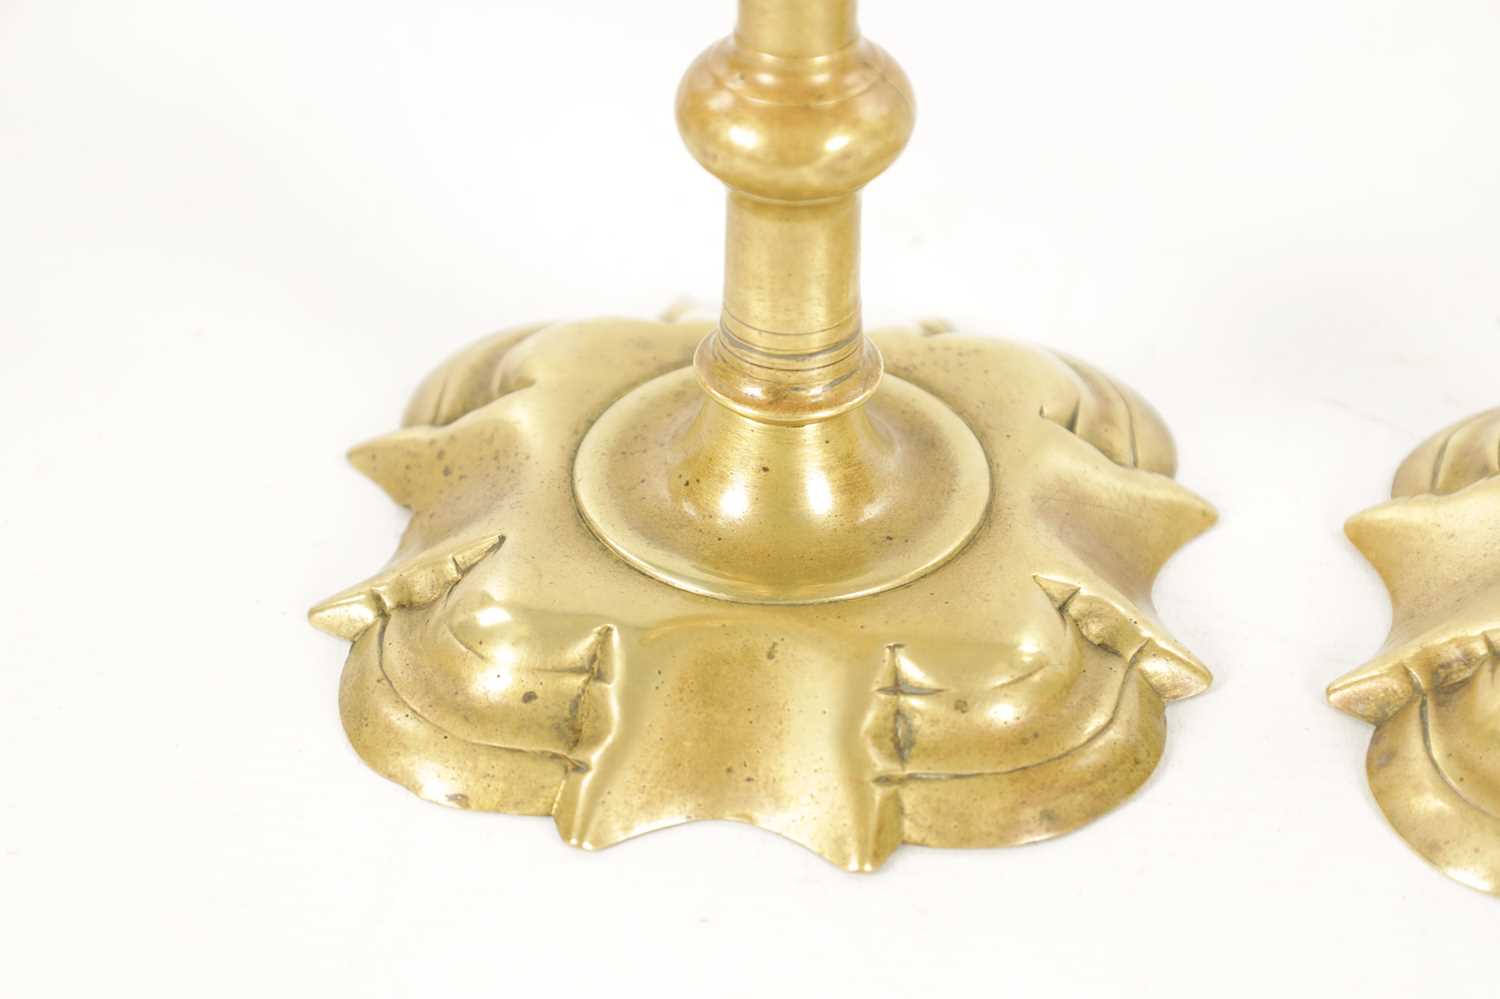 A PAIR OF MID 18TH CENTURY SEAMED CAST BRASS CANDLESTICKS - Image 3 of 8